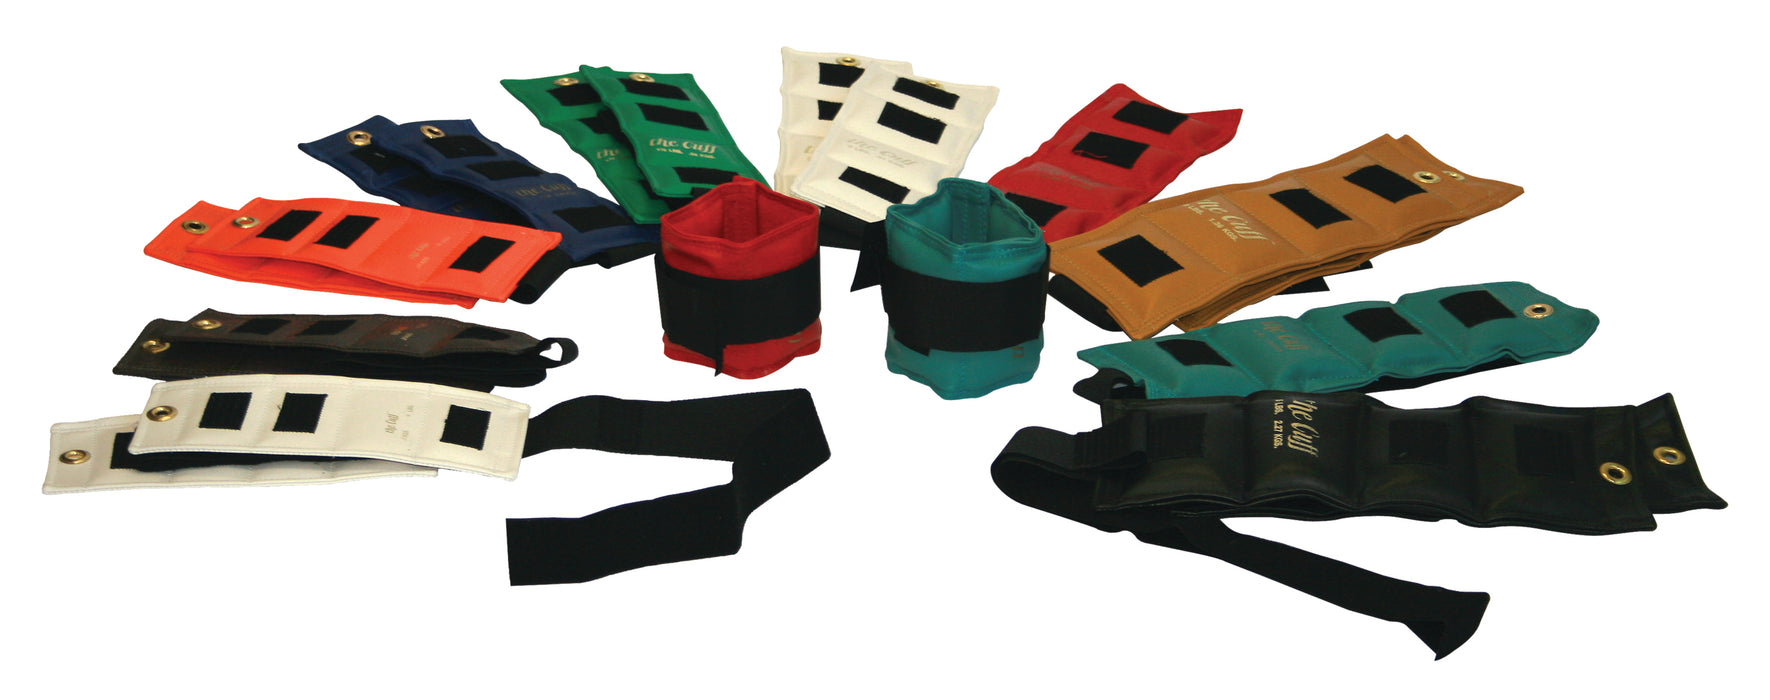 the Cuff 10-2552 Deluxe Ankle And Wrist Weight, 20 Piece Set (2 Each: .25, .5, .75, 1, 1.5, 2, 2.5, 3, 4, 5 Lb.)